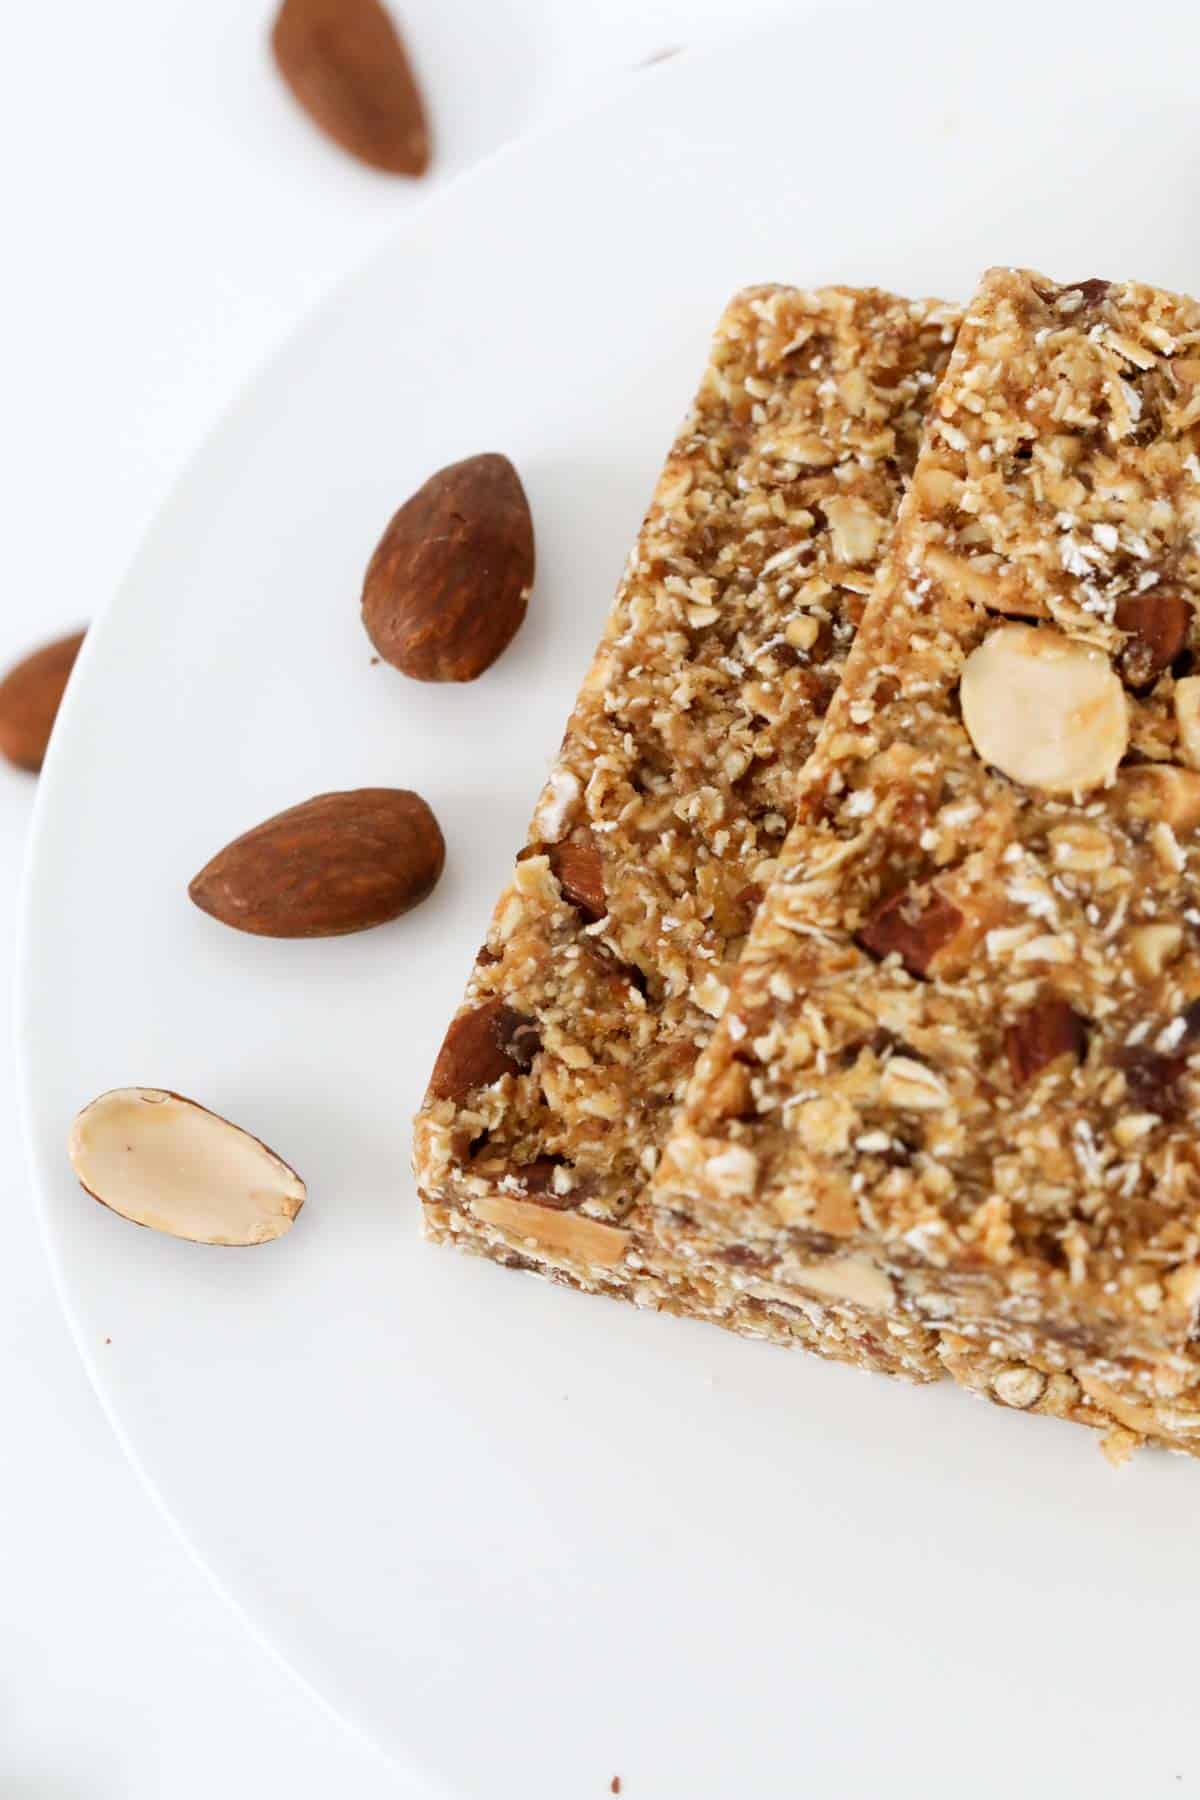 Almond, oat and date muesli bars on a white cake stand with roasted almonds scattered nearby.